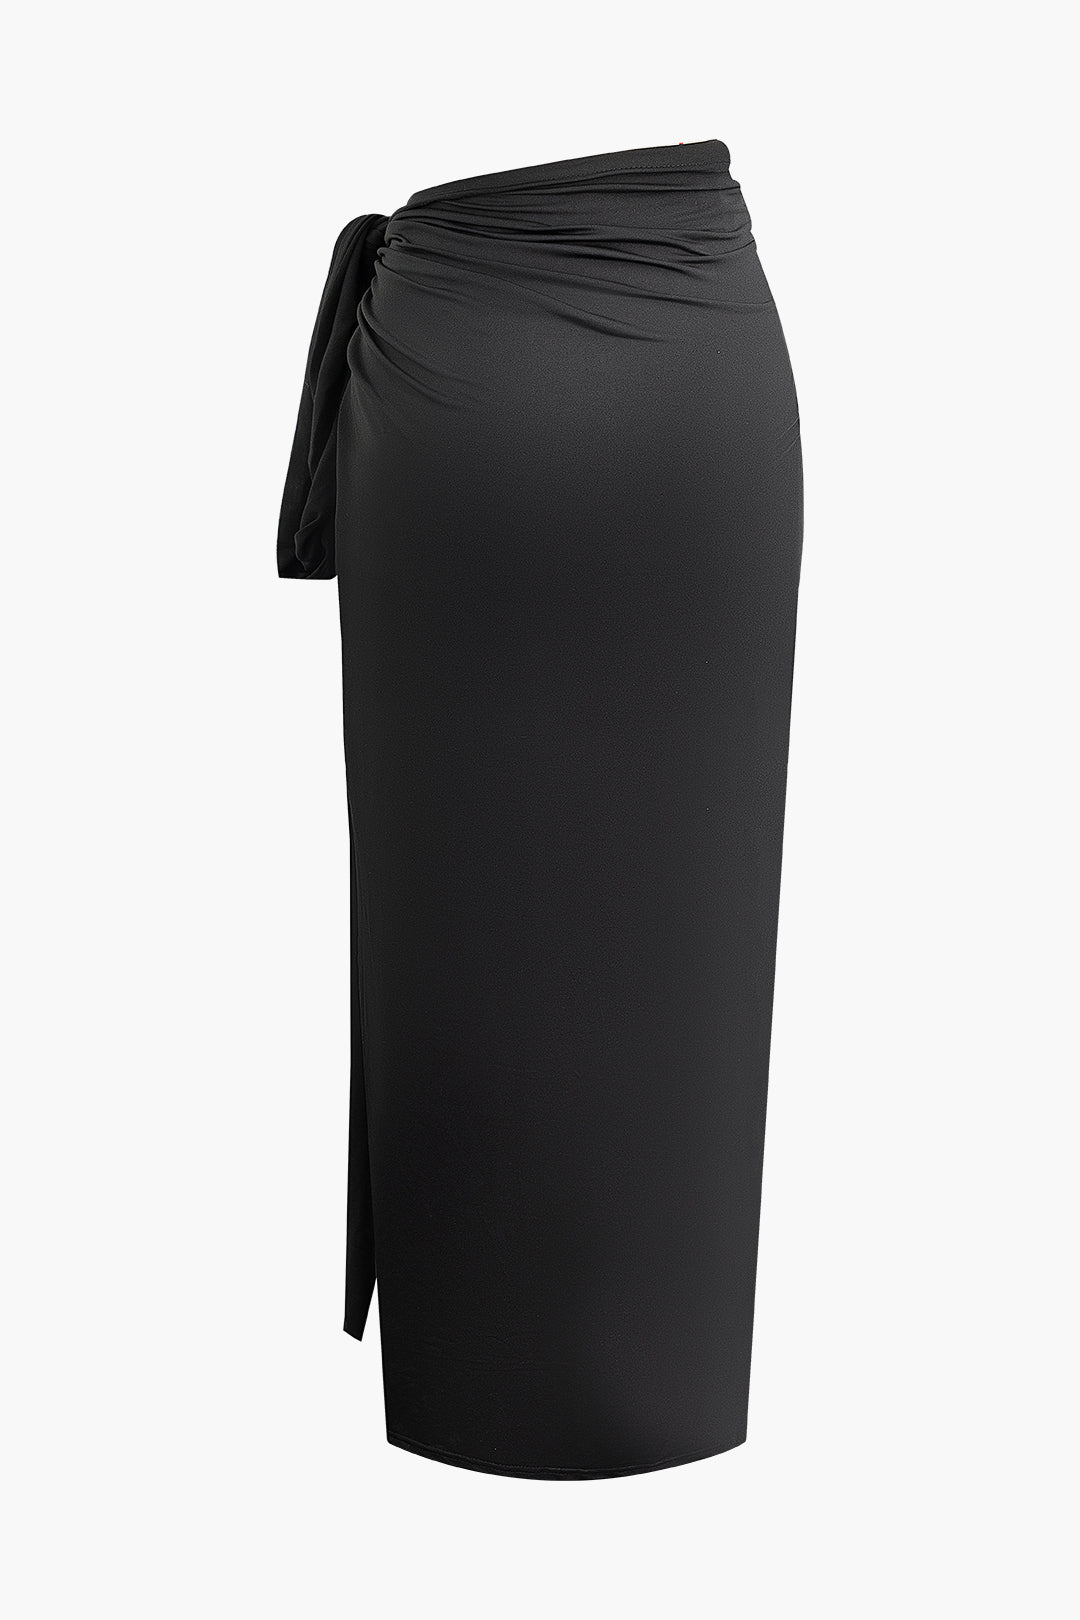 Asymmetric Ruched Cami Top And Tie Split Maxi Skirt Set